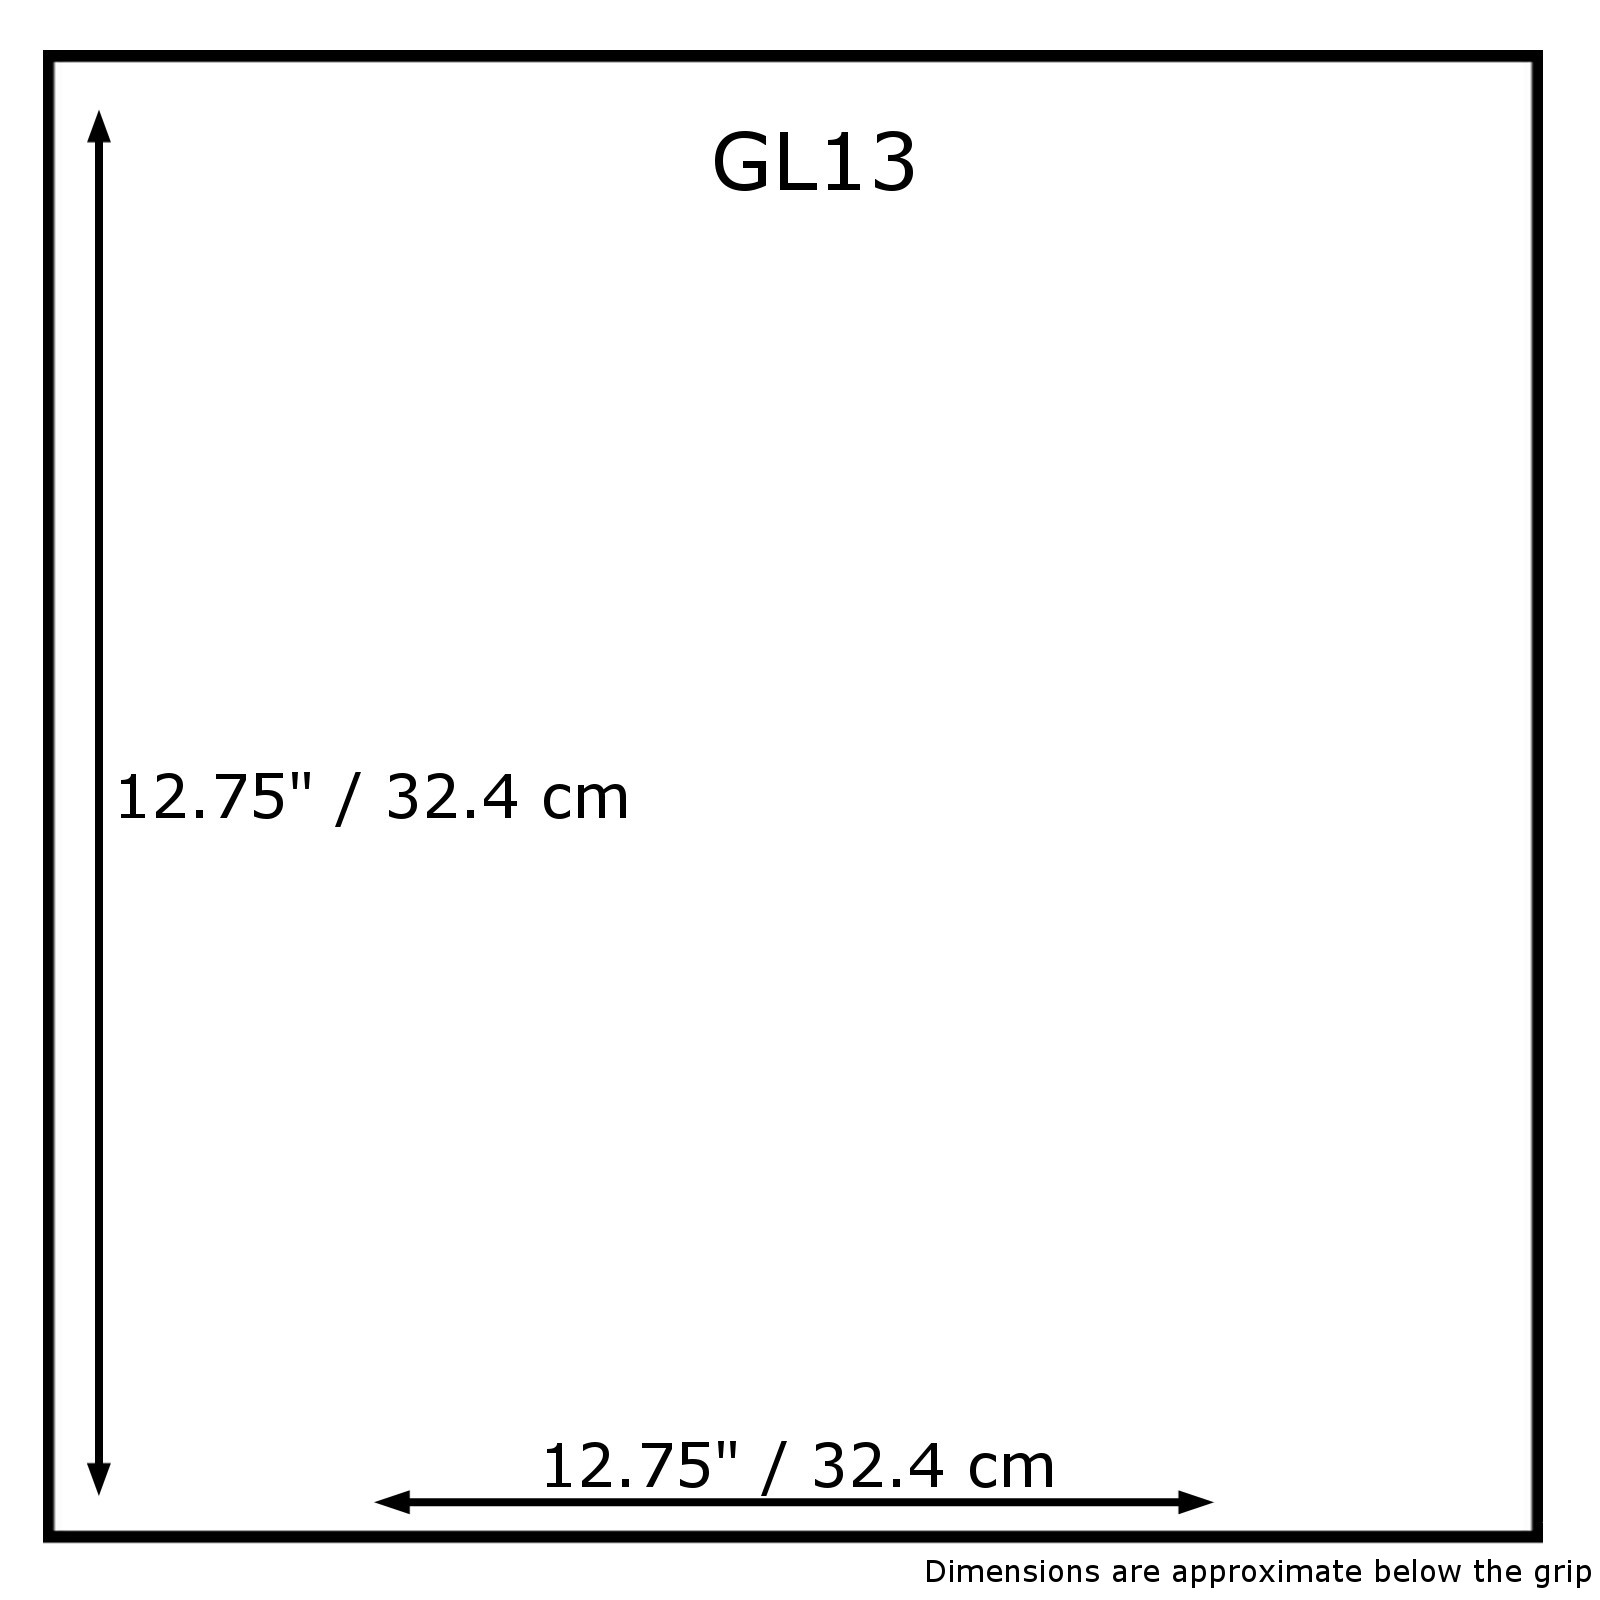 Grip Seal Bags - GL13 - 12.75'' x 12.75'' - 45 micron - Pack of 100